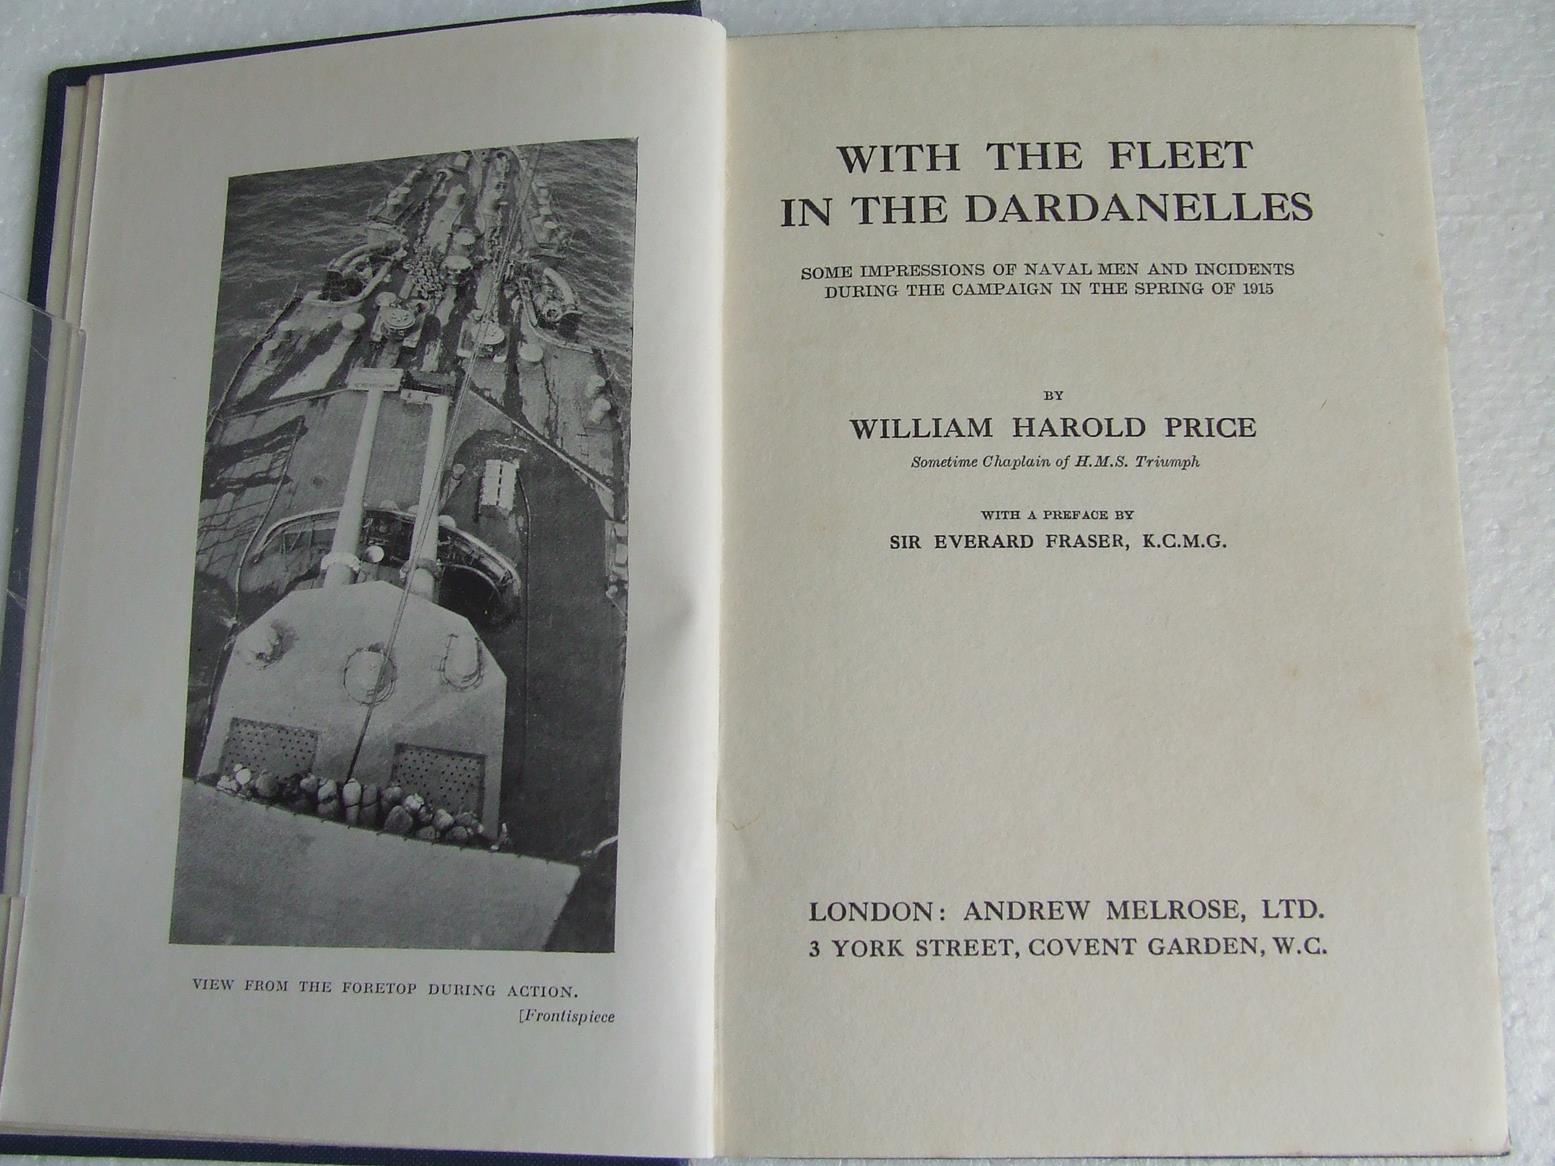 With the Fleet in the Dardanelles